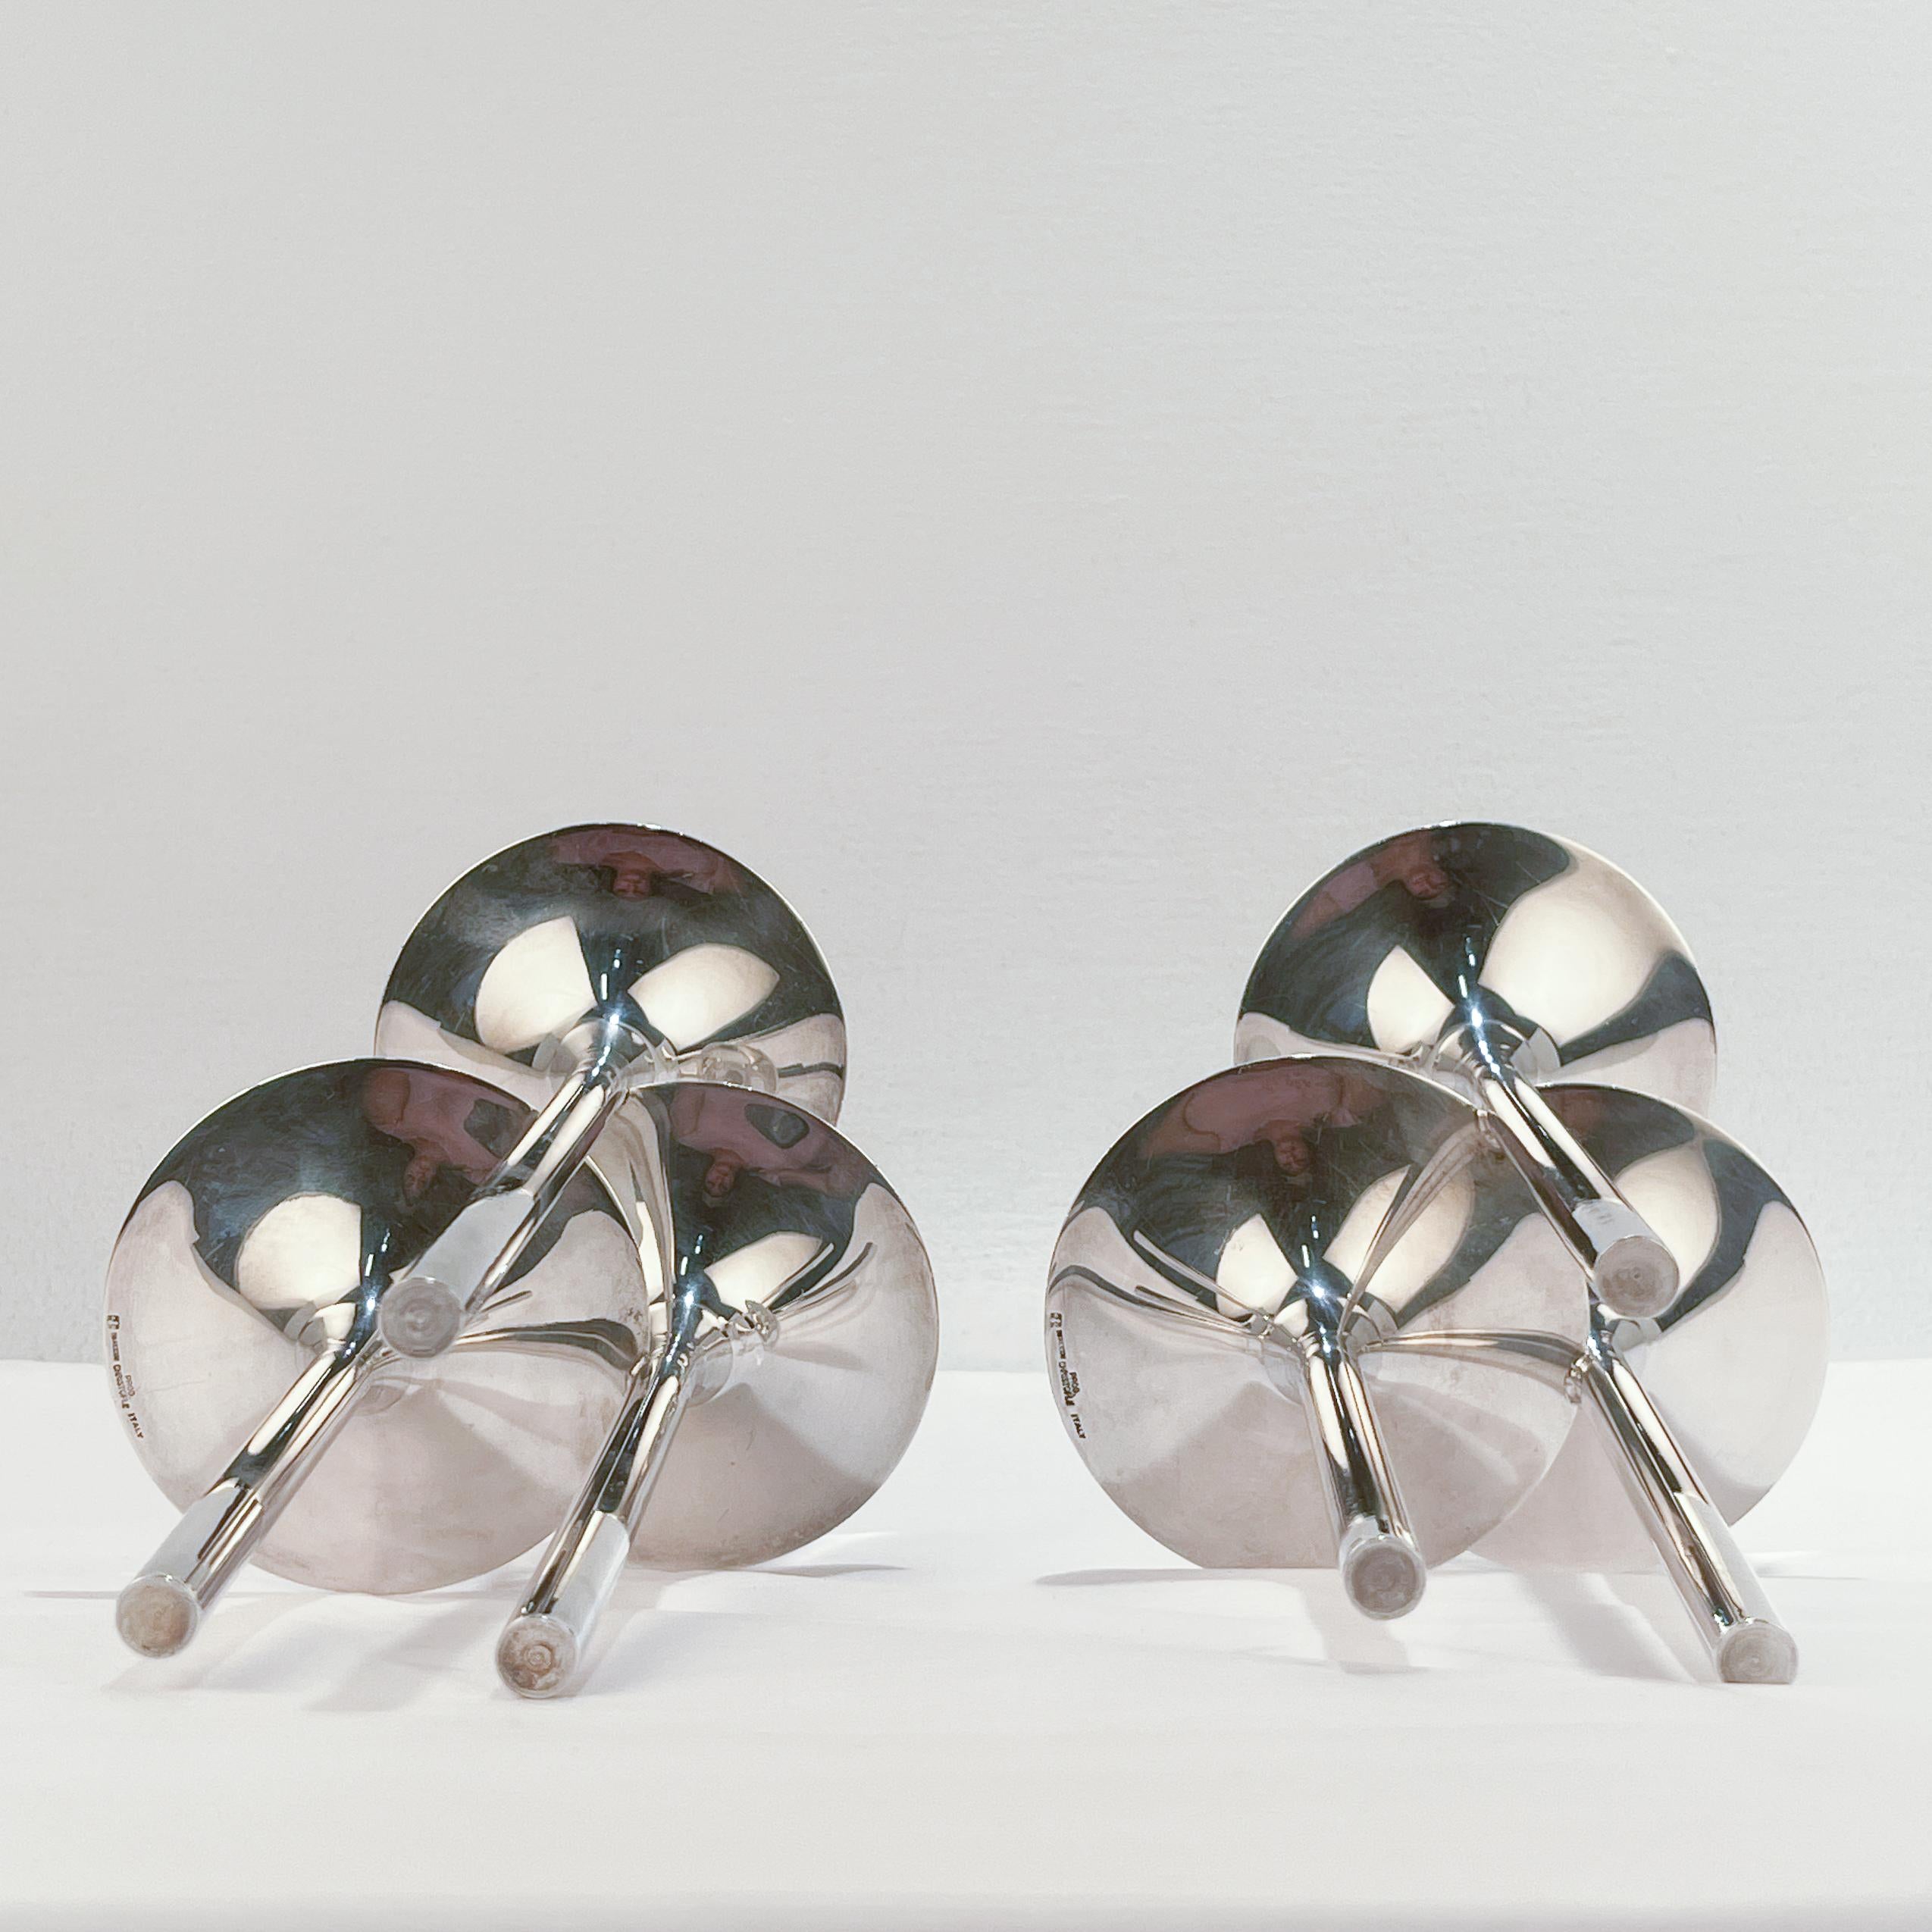 Pair of Modernist Silver Plate Candle Holders by Lino Sabattini for Christofle 1